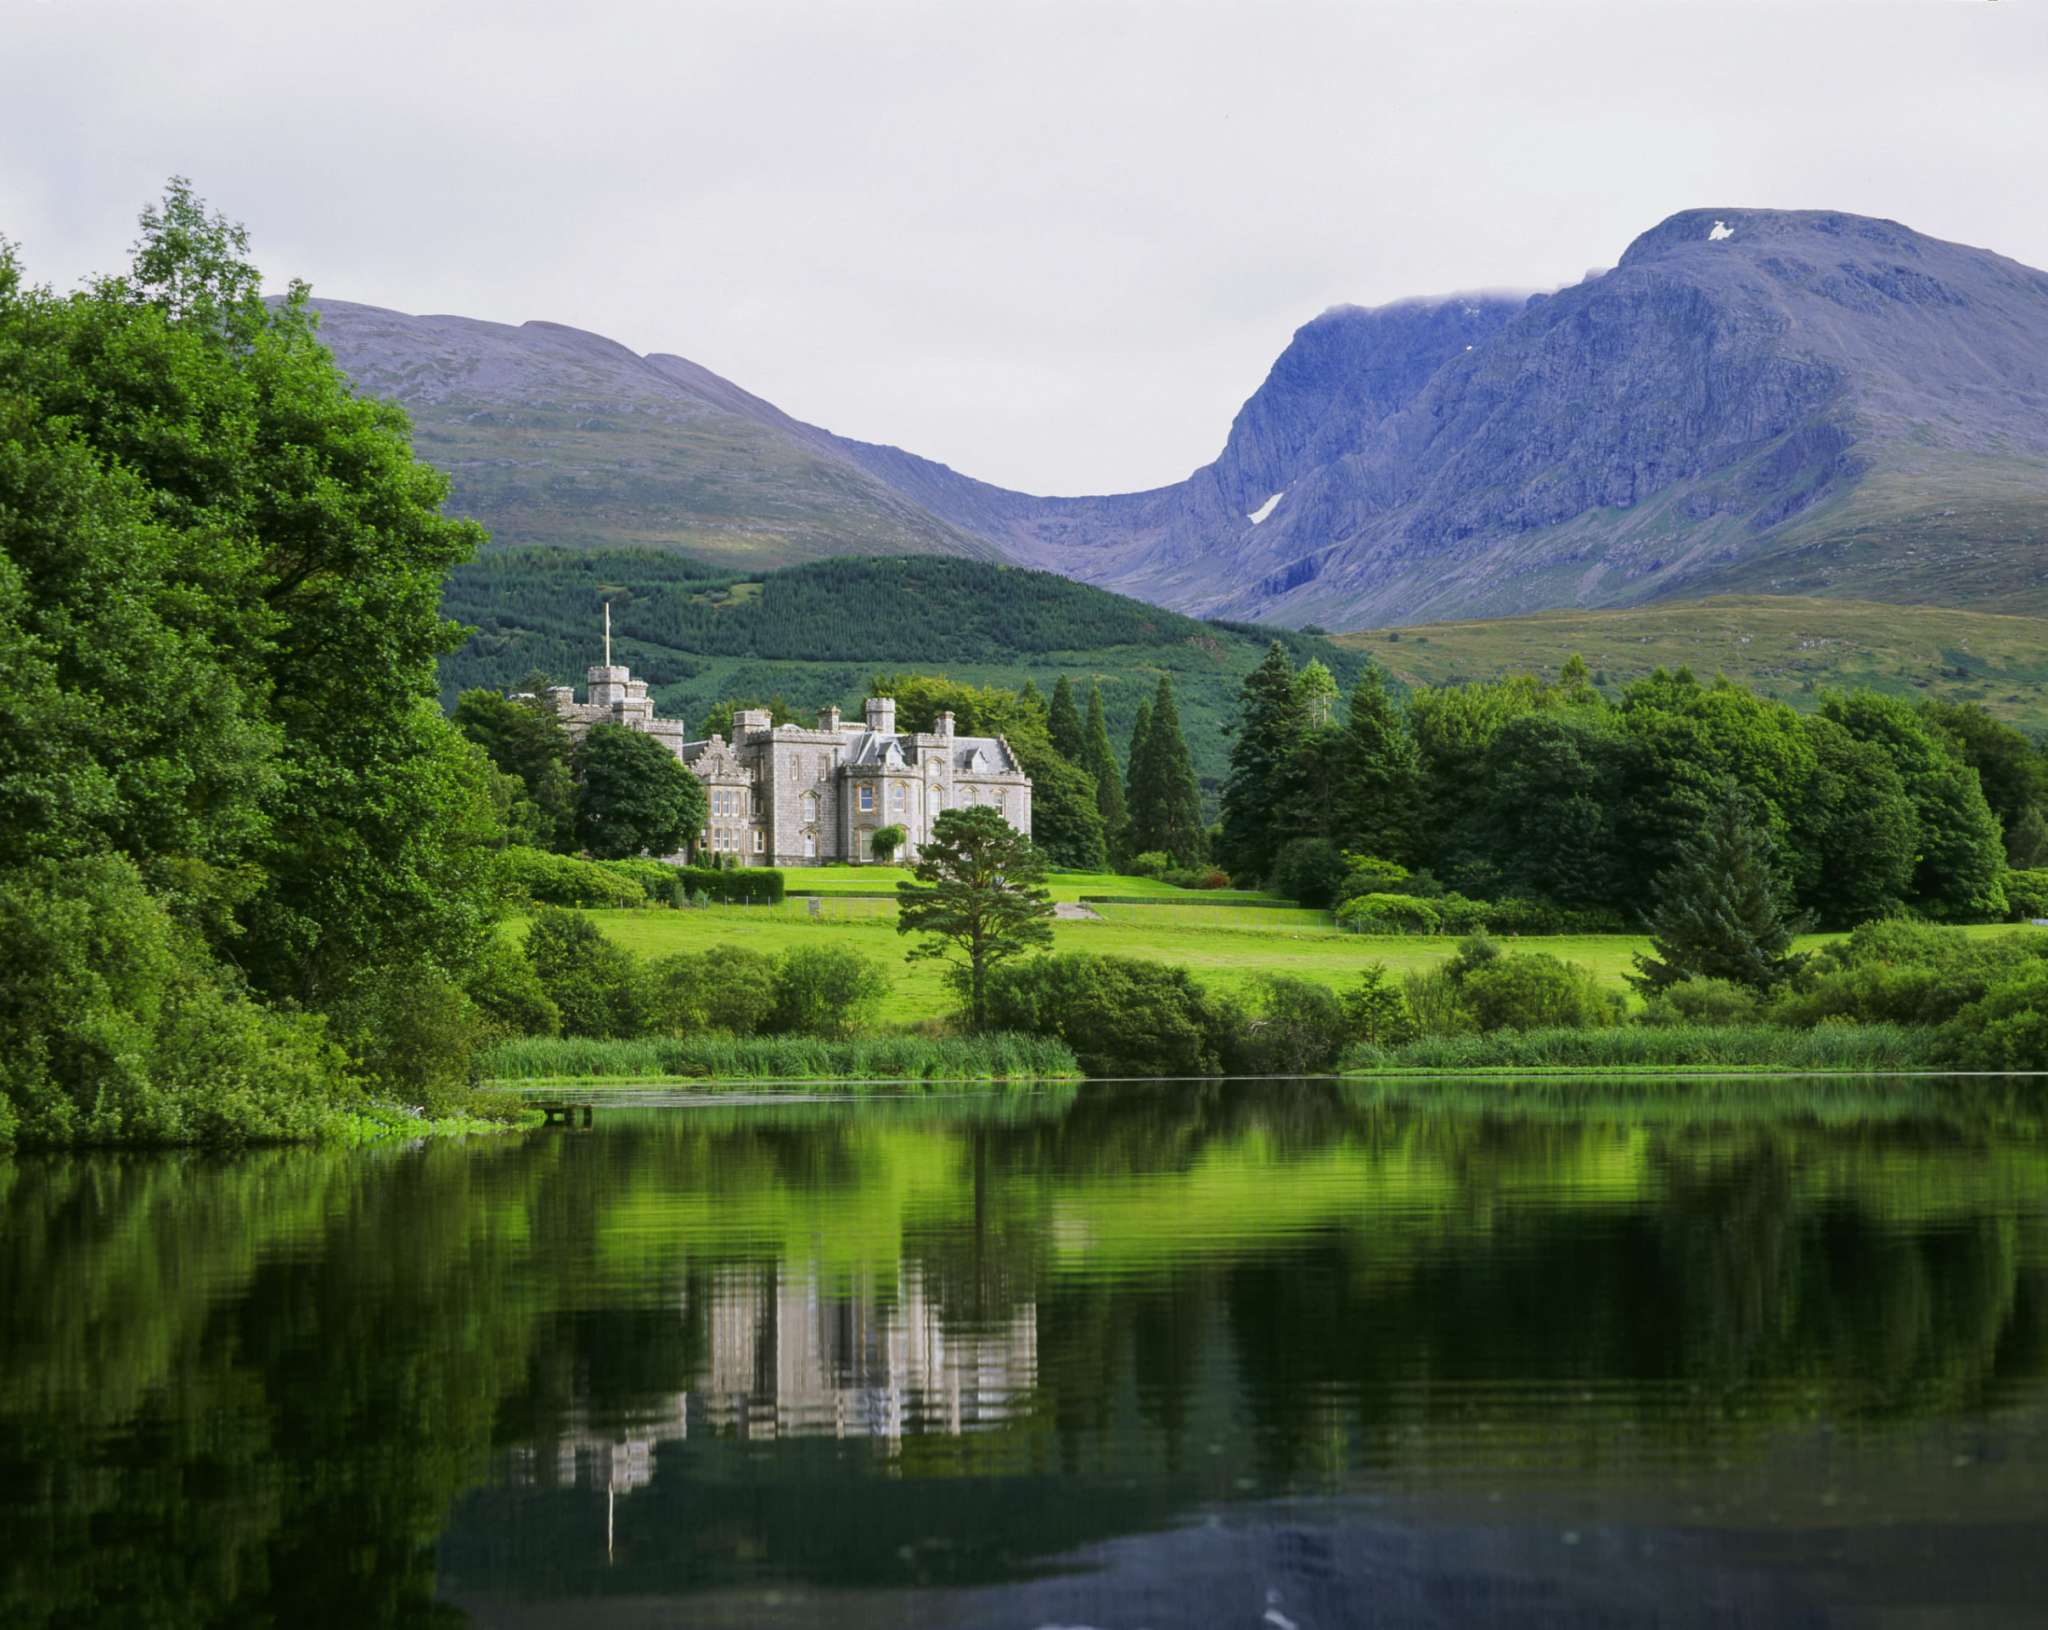 Inverlochy castle from a distance.